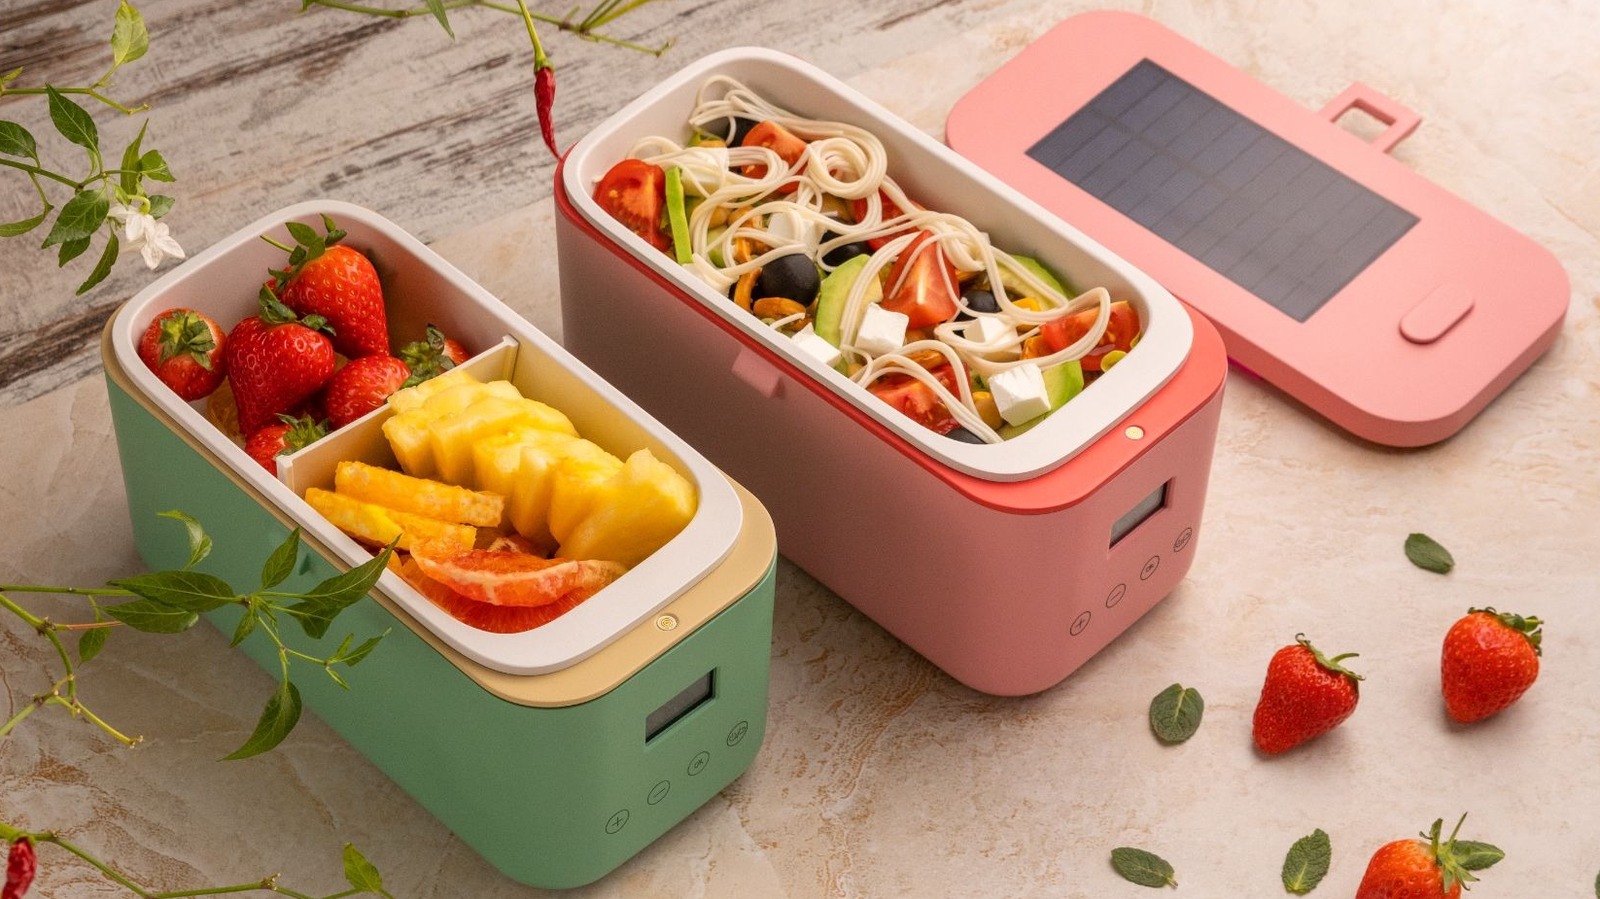 5 Lunch Box Options To Keep Your Food Hot And Fresh - NDTV Food